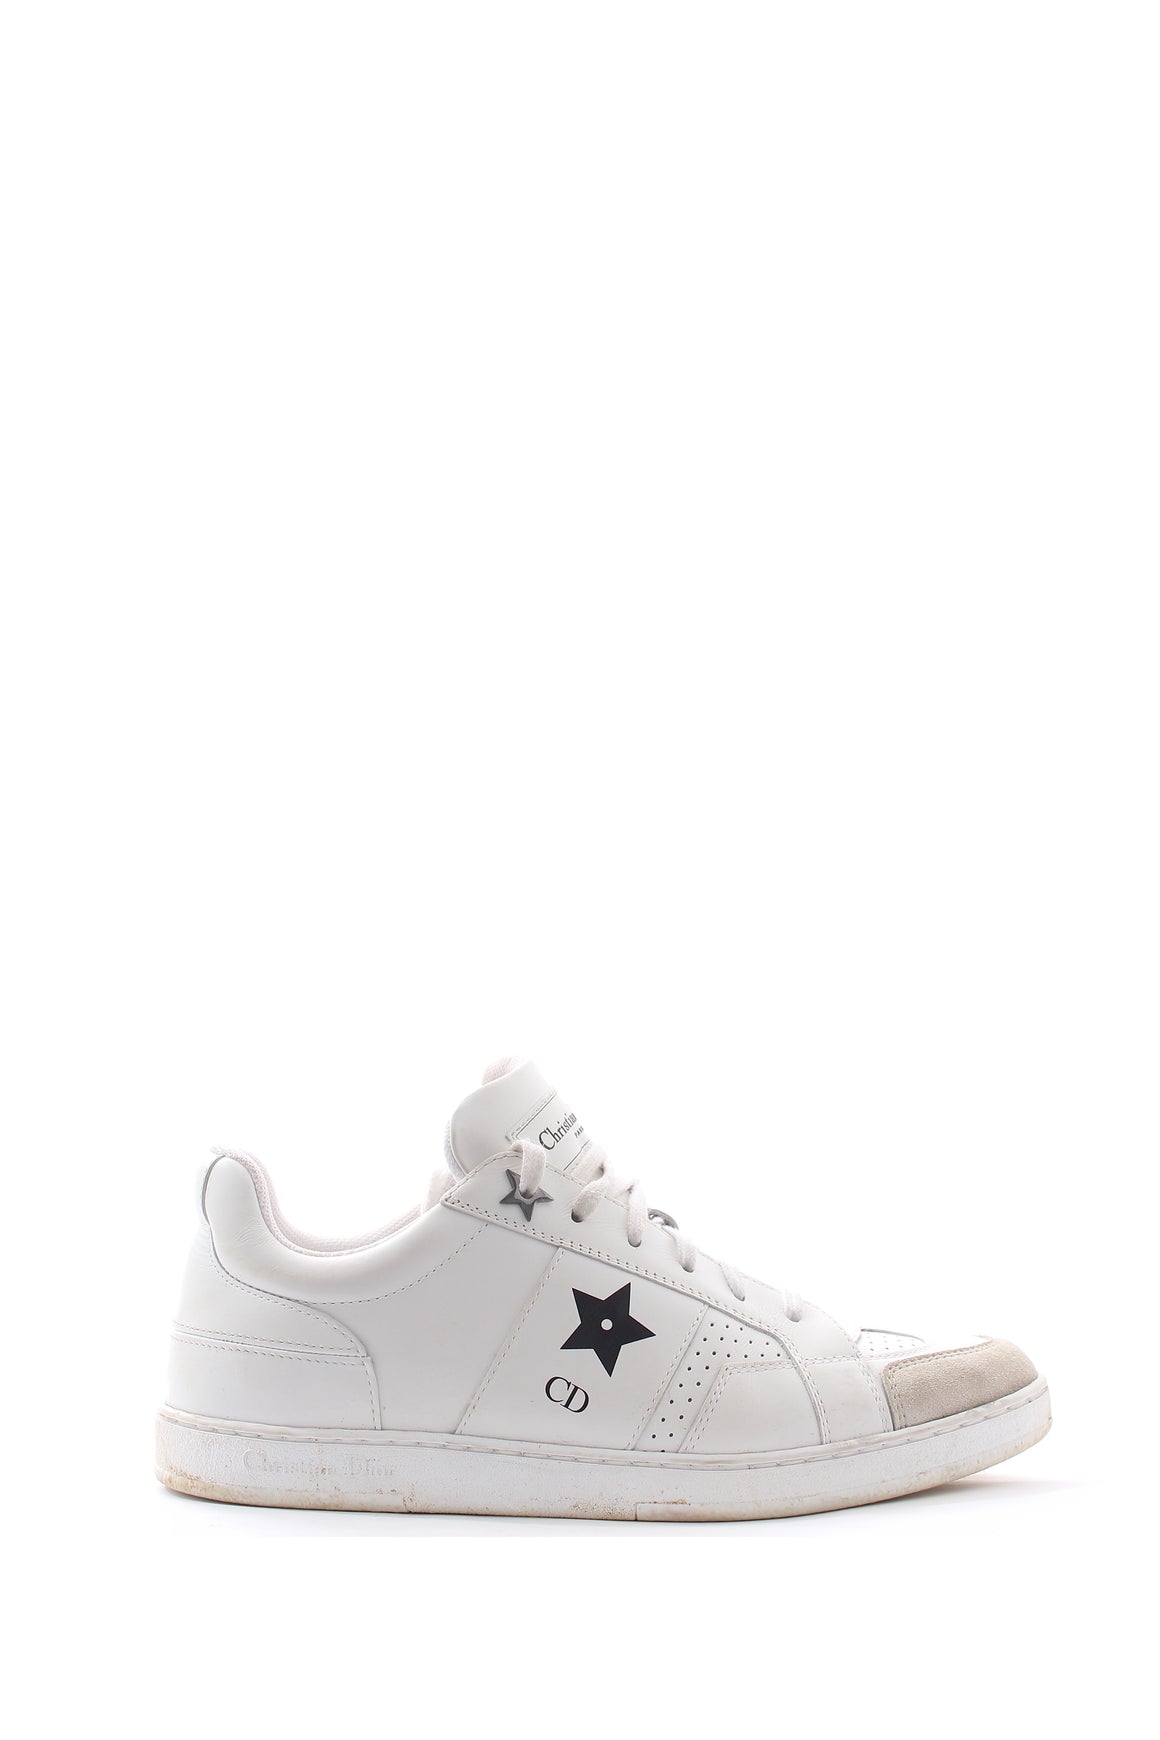 Dior Star Leather and Suede Sneakers